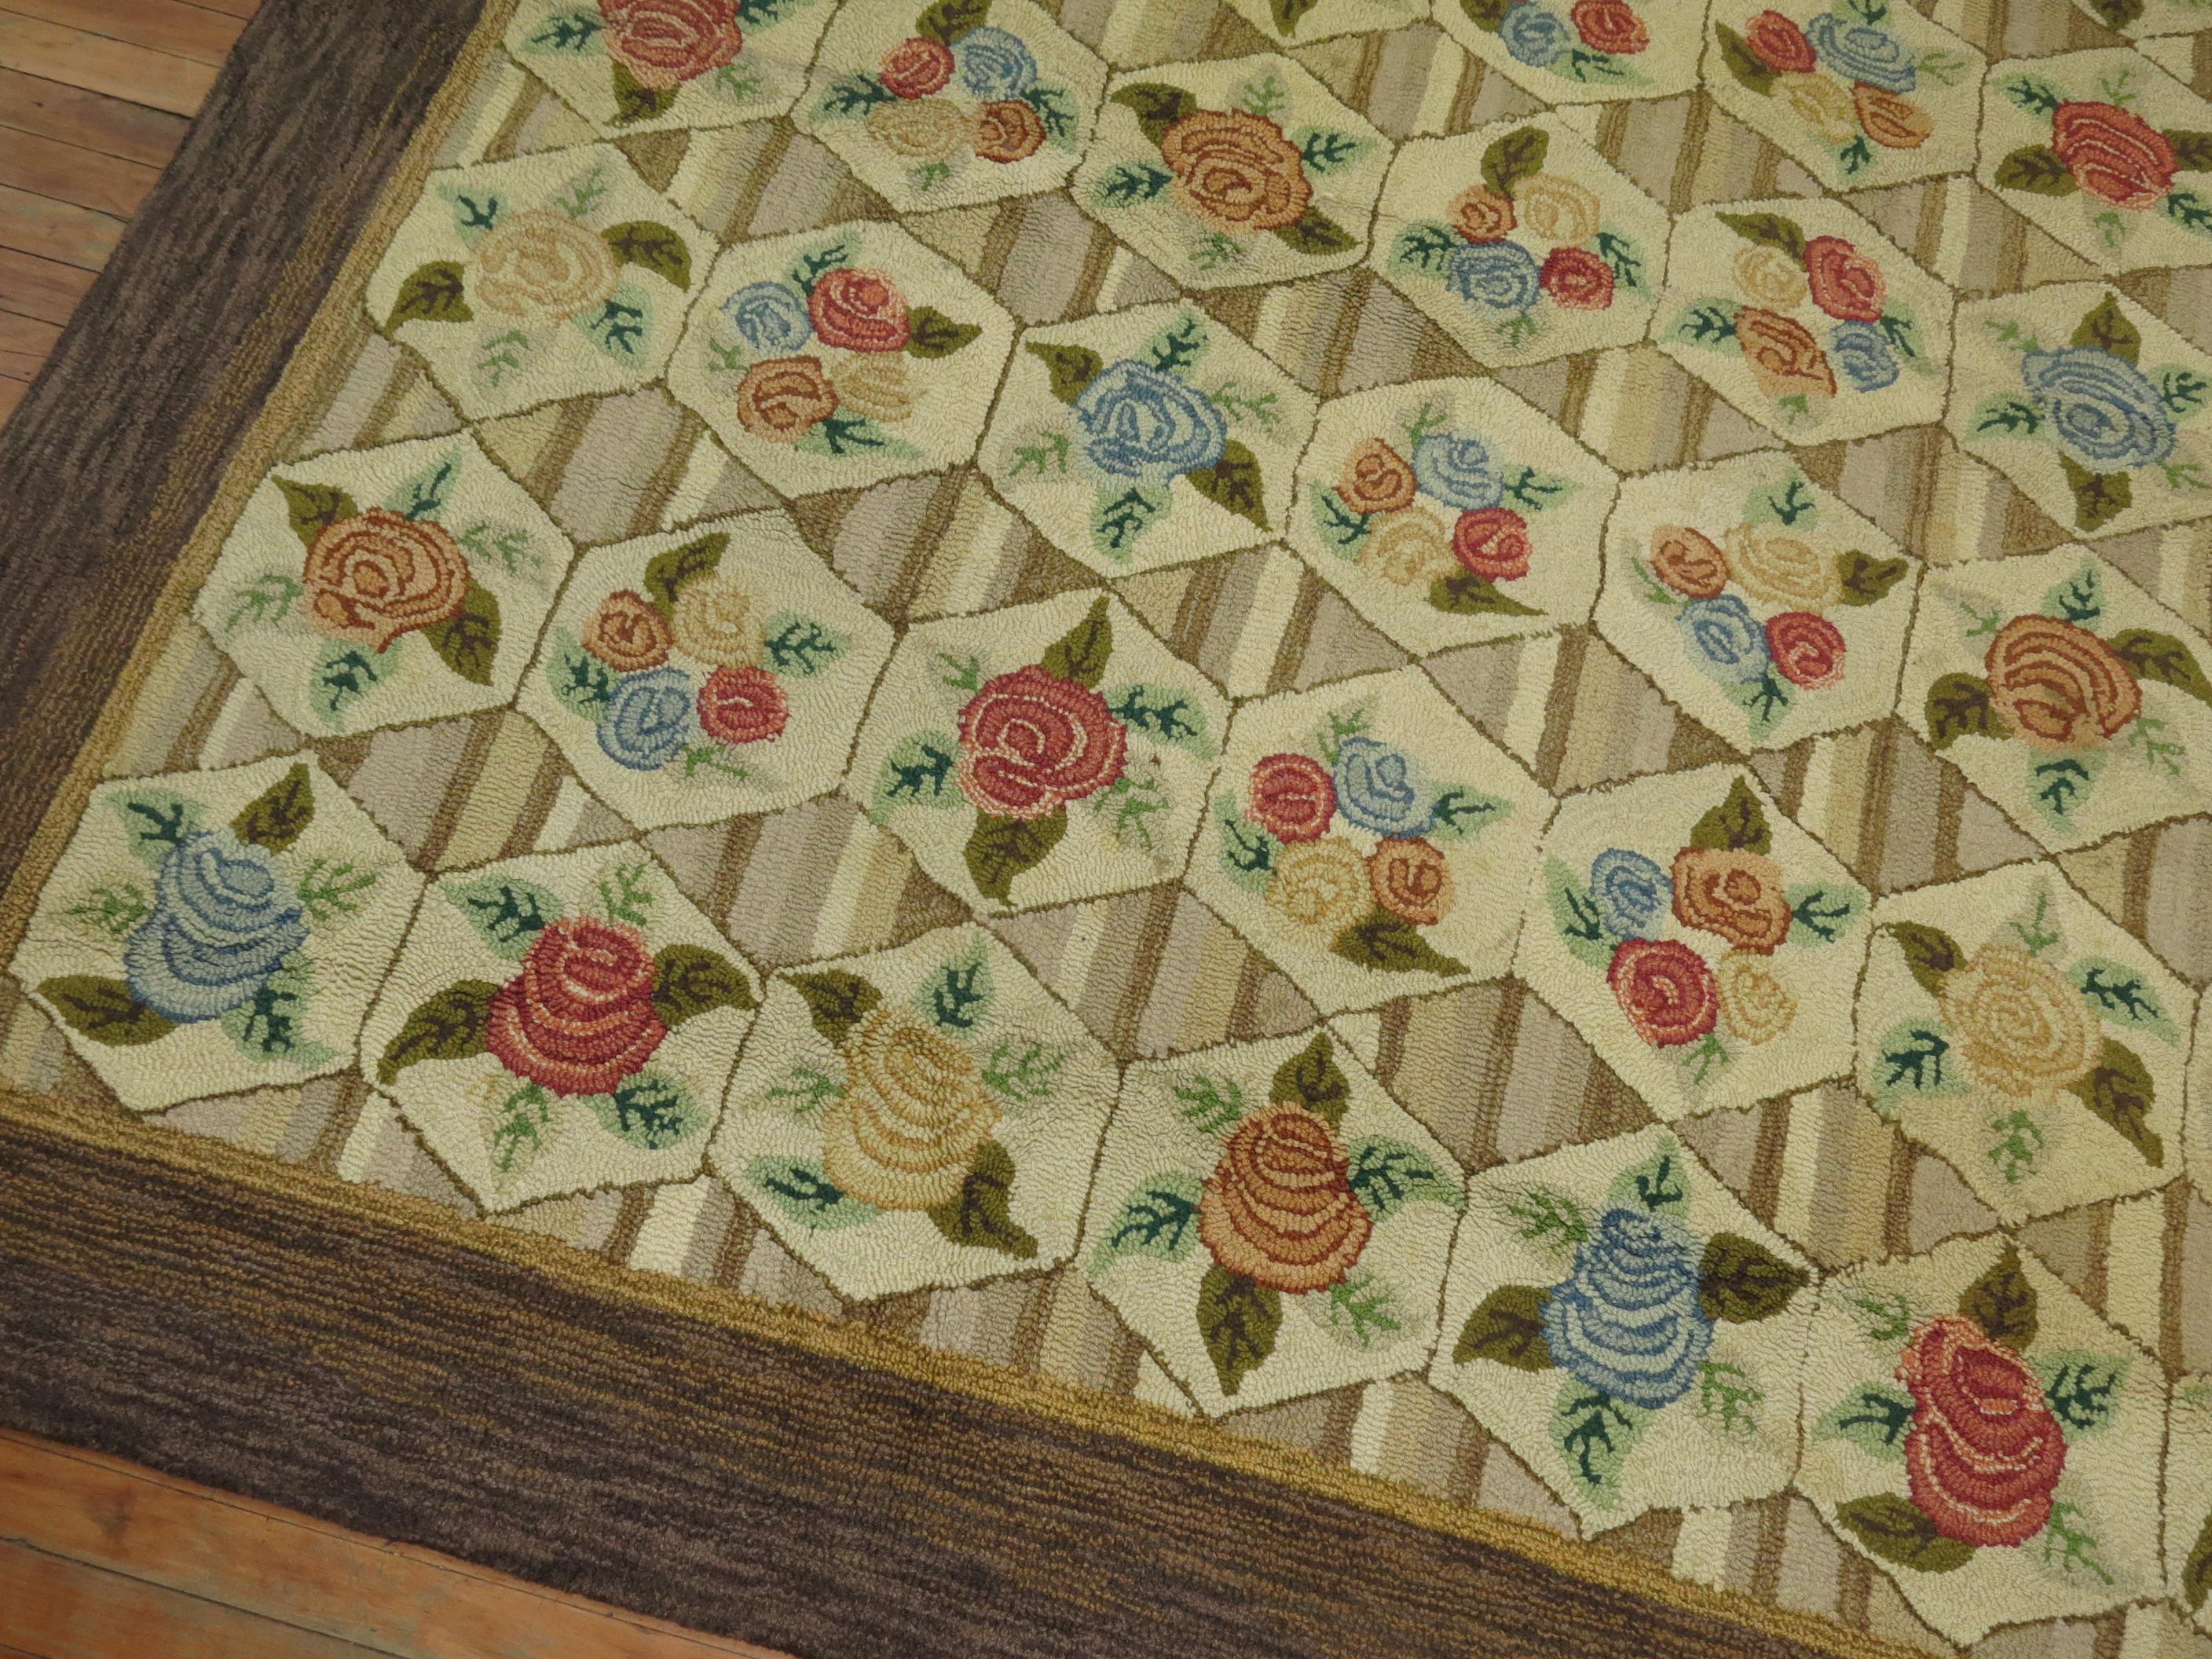 Rustic Color Floral Motif American Hooked Room Size Rug, Mid-20th Century For Sale 2